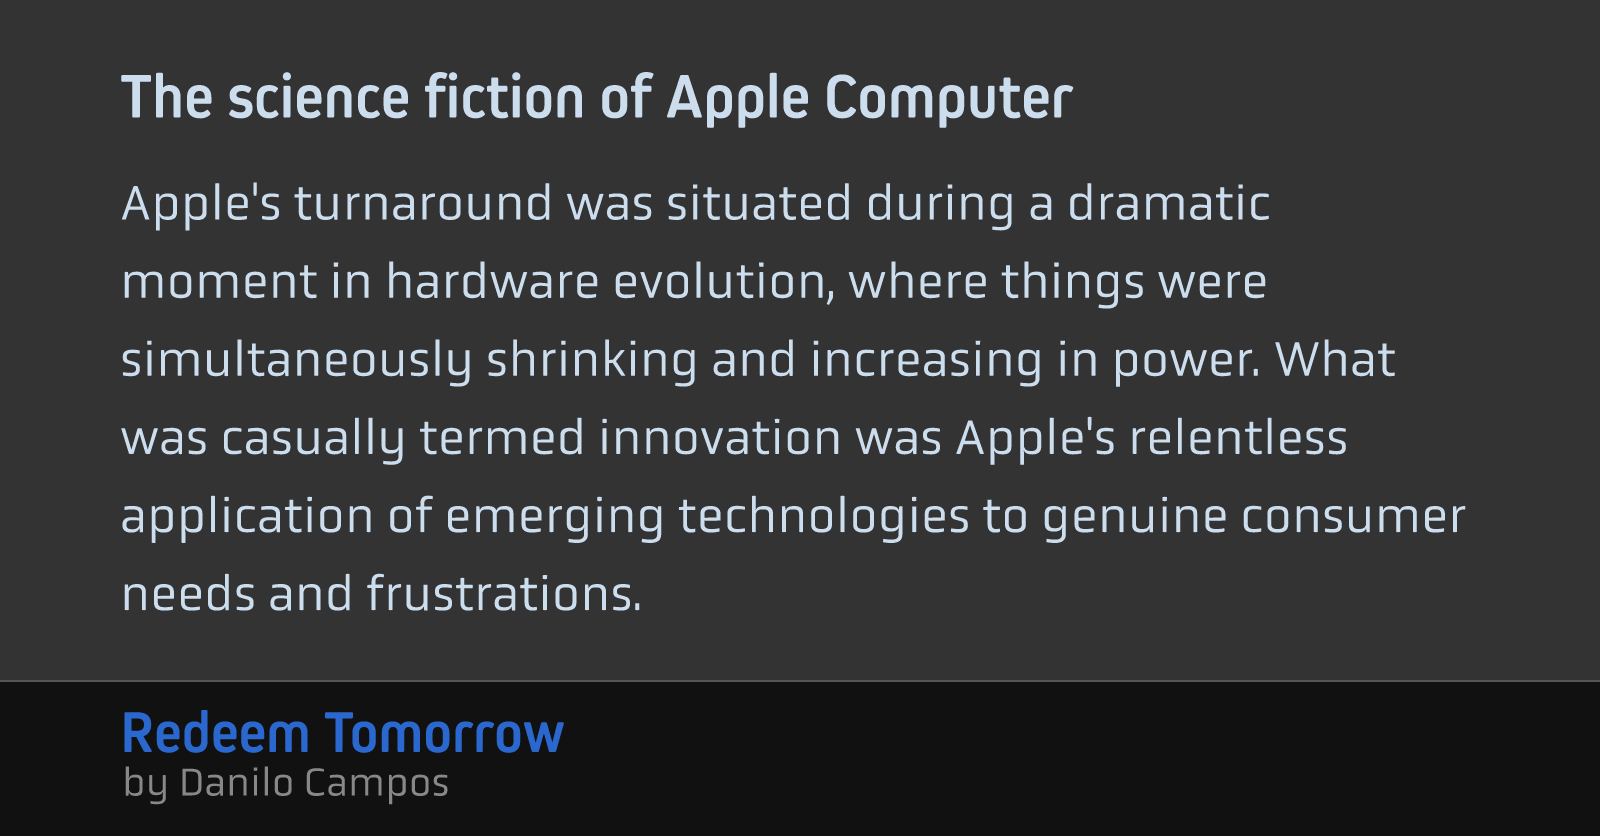 The science fiction of Apple Computer